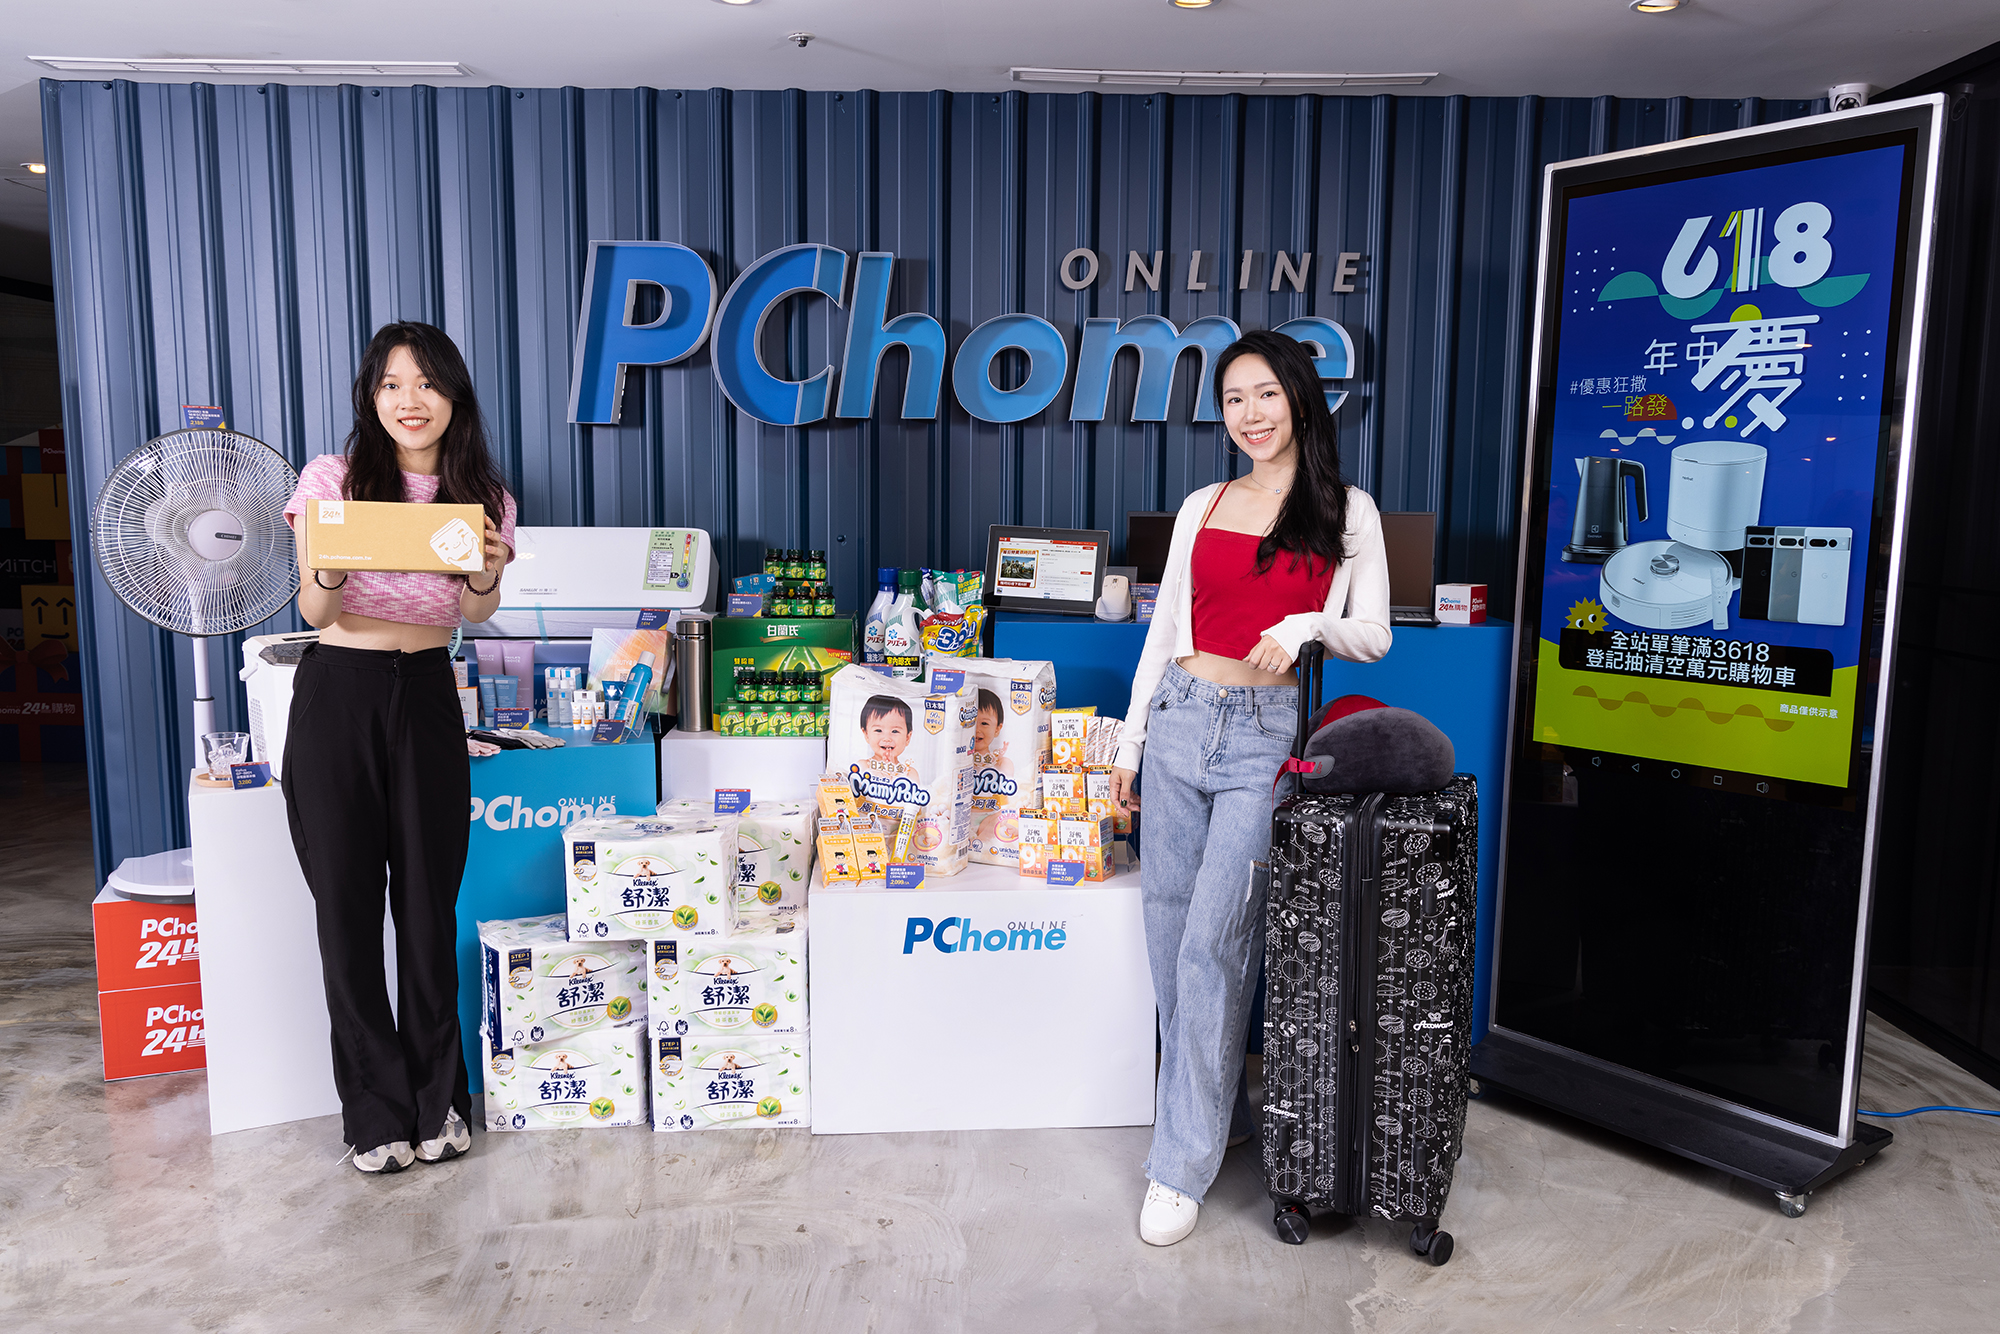 PChome 24h Shopping’s Sales Increase in Double Digit during the 618 Mid-Year Sale Campaign with an Announcement of the TOP 5 Best-Selling Categories